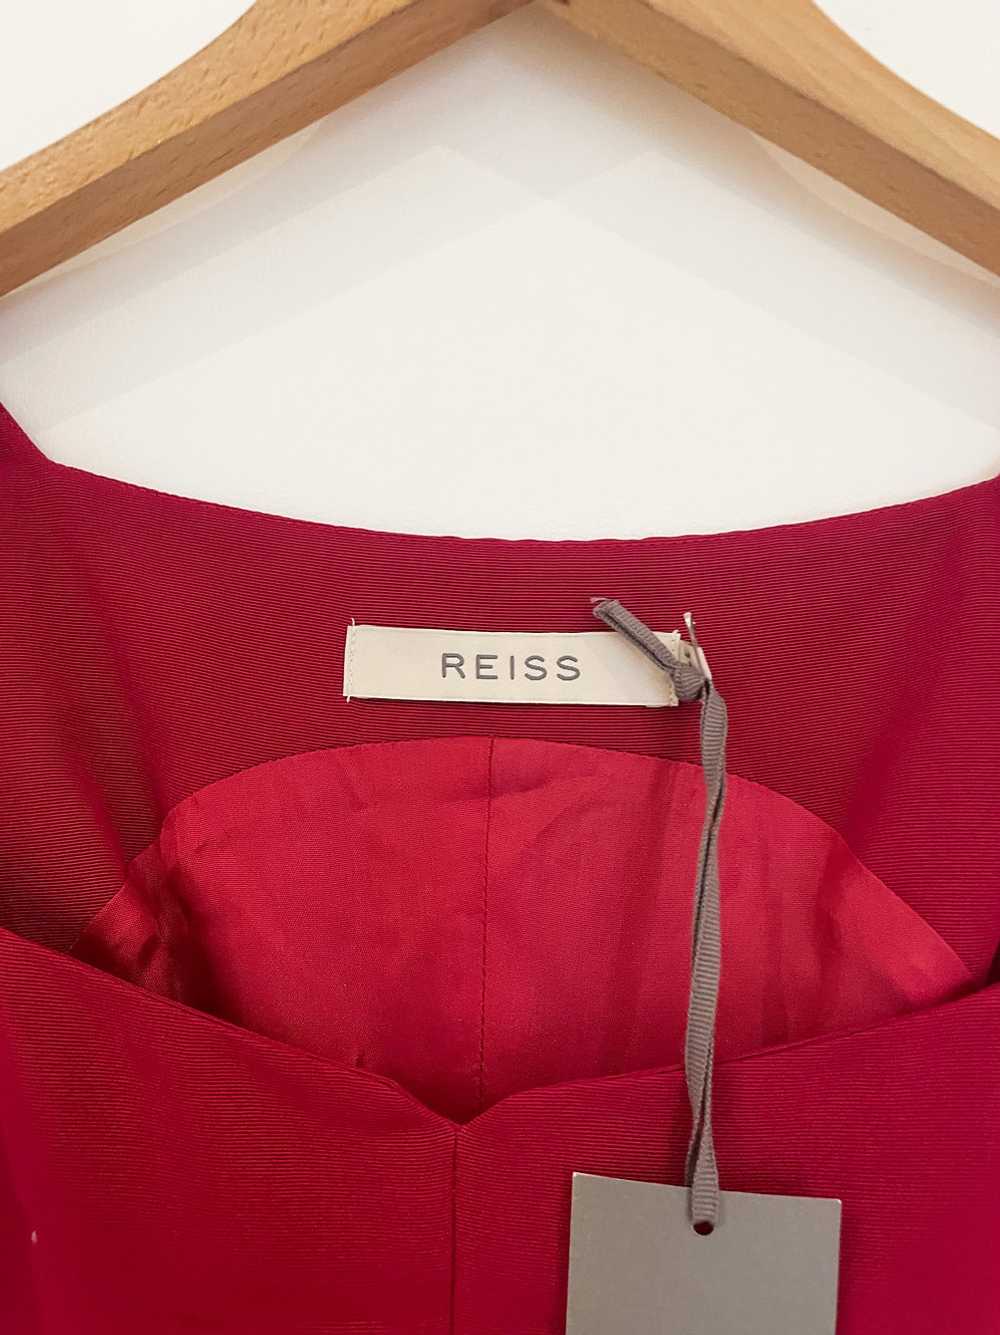 New With Tags Reiss Milly Dress UK 6 - image 3